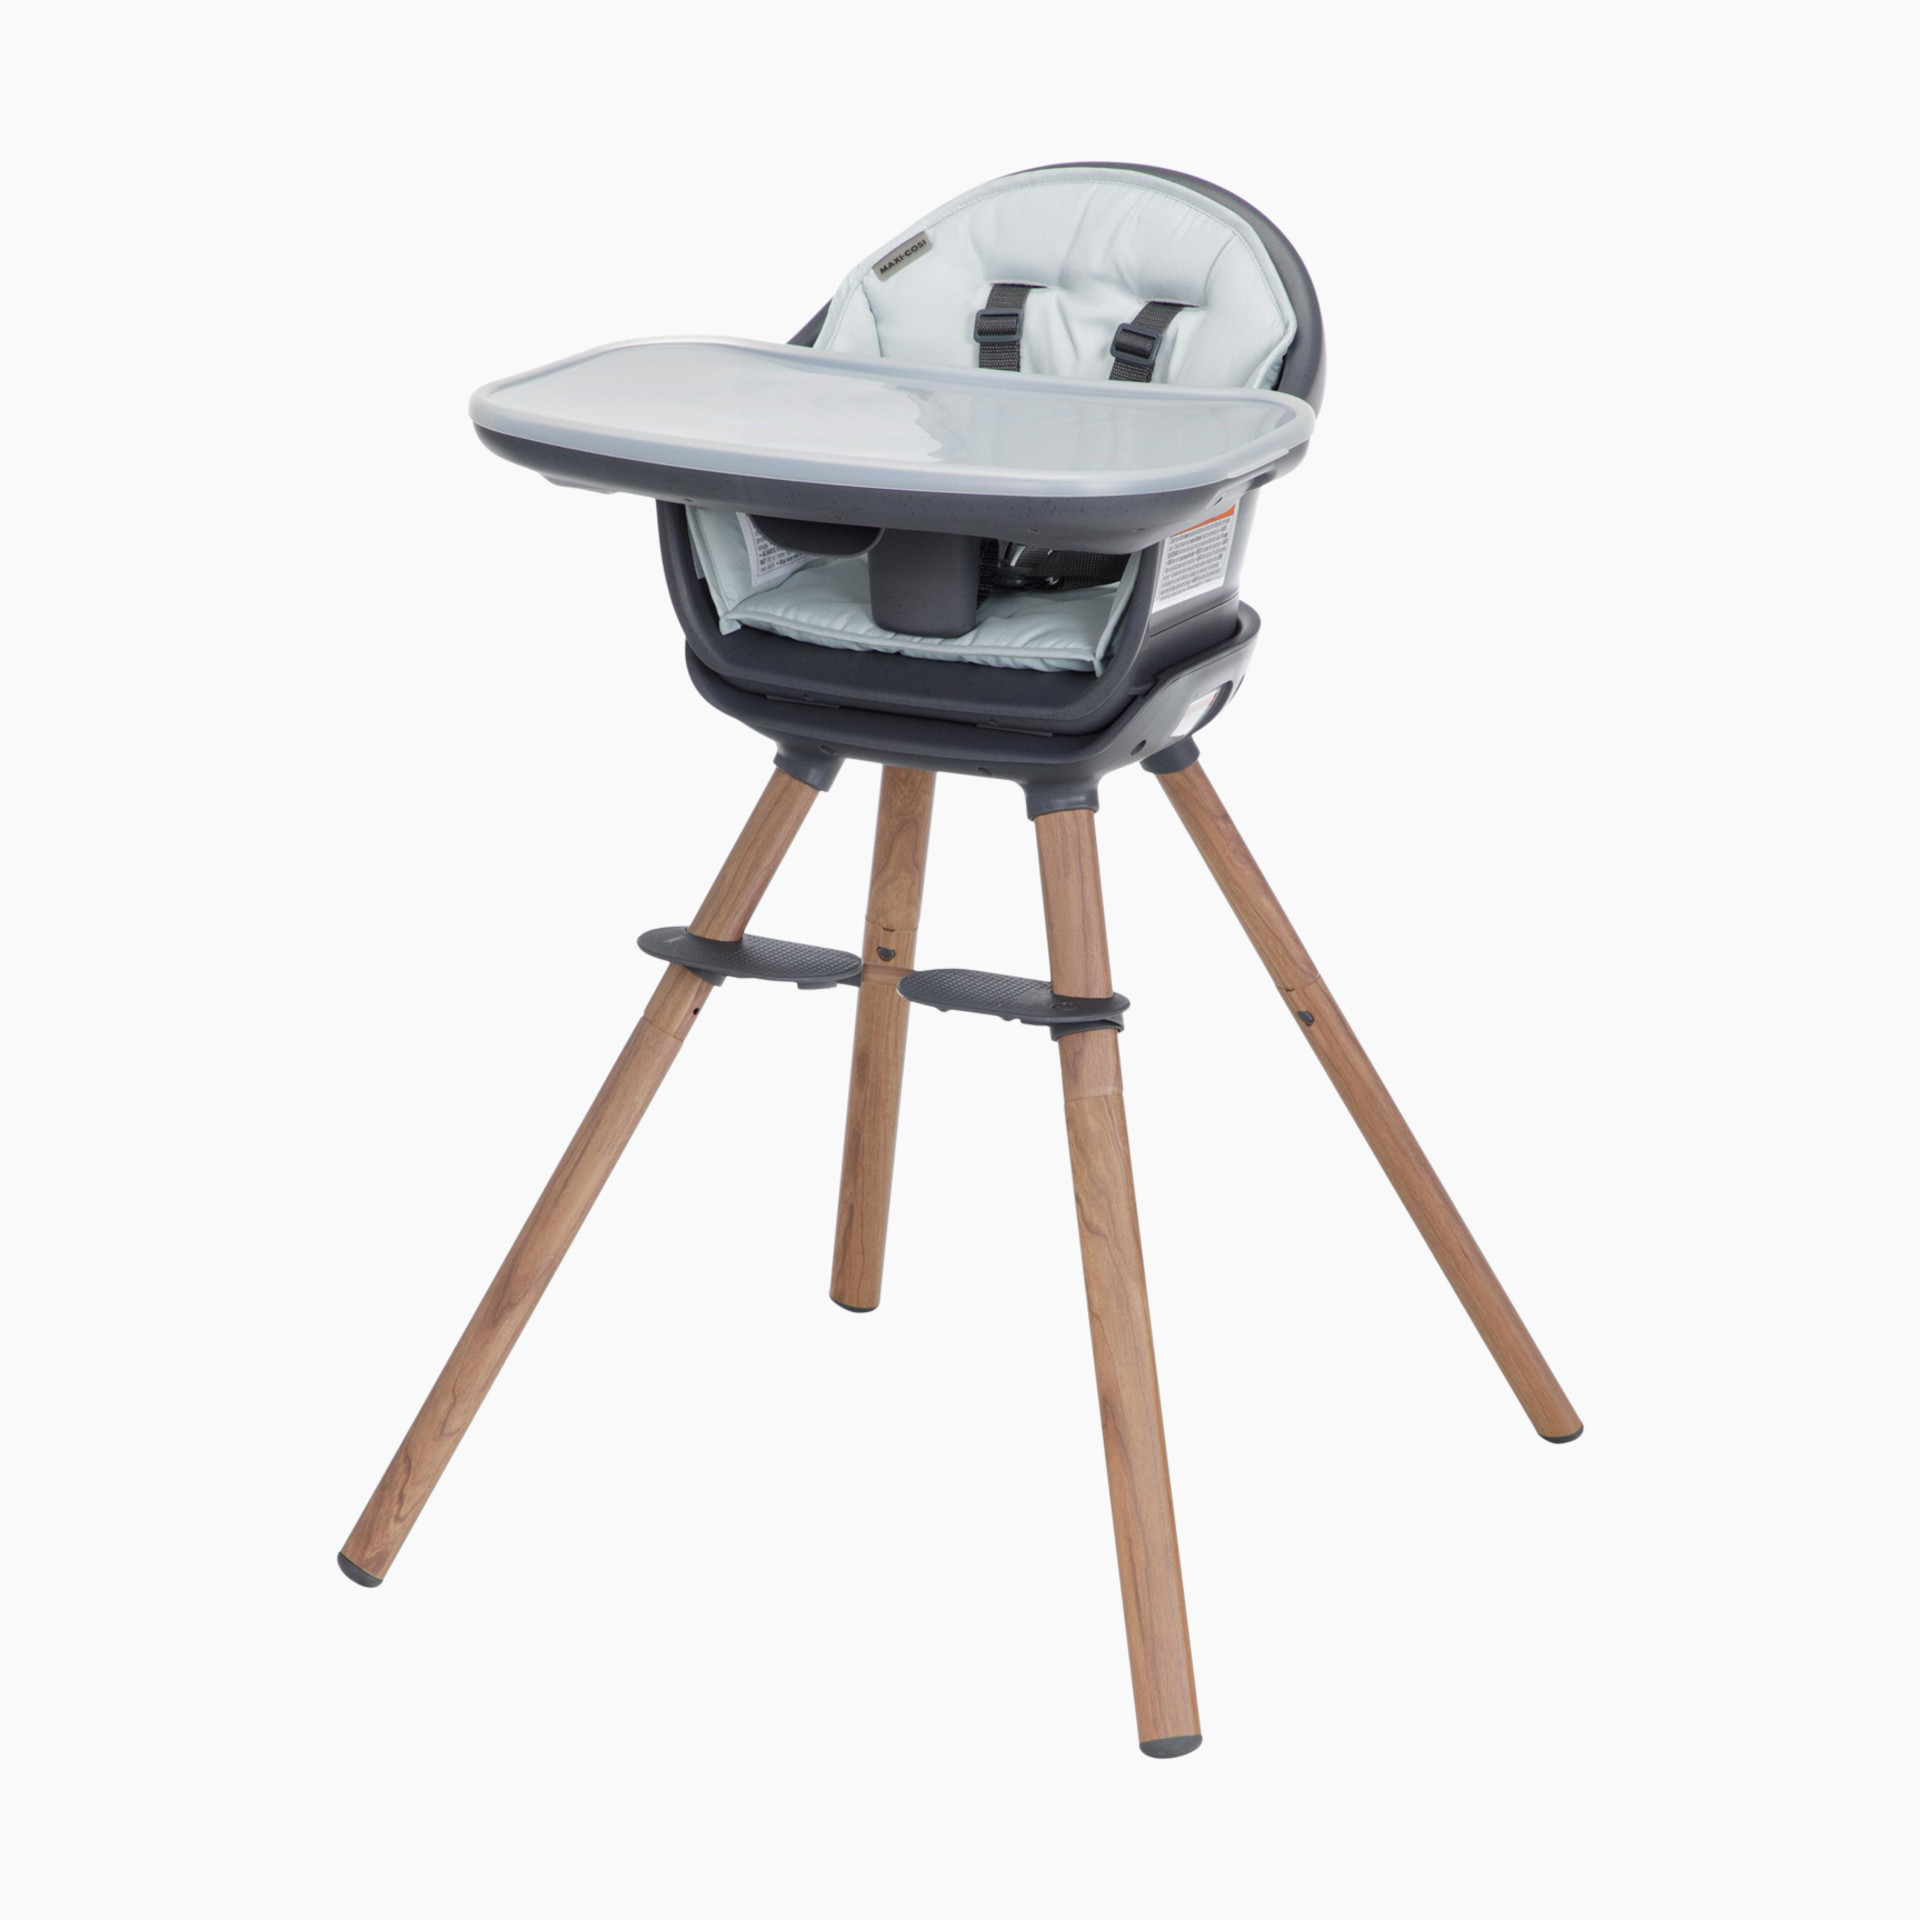 An Honest Review of the Lalo High Chair (aka The Chair) - The Filtery